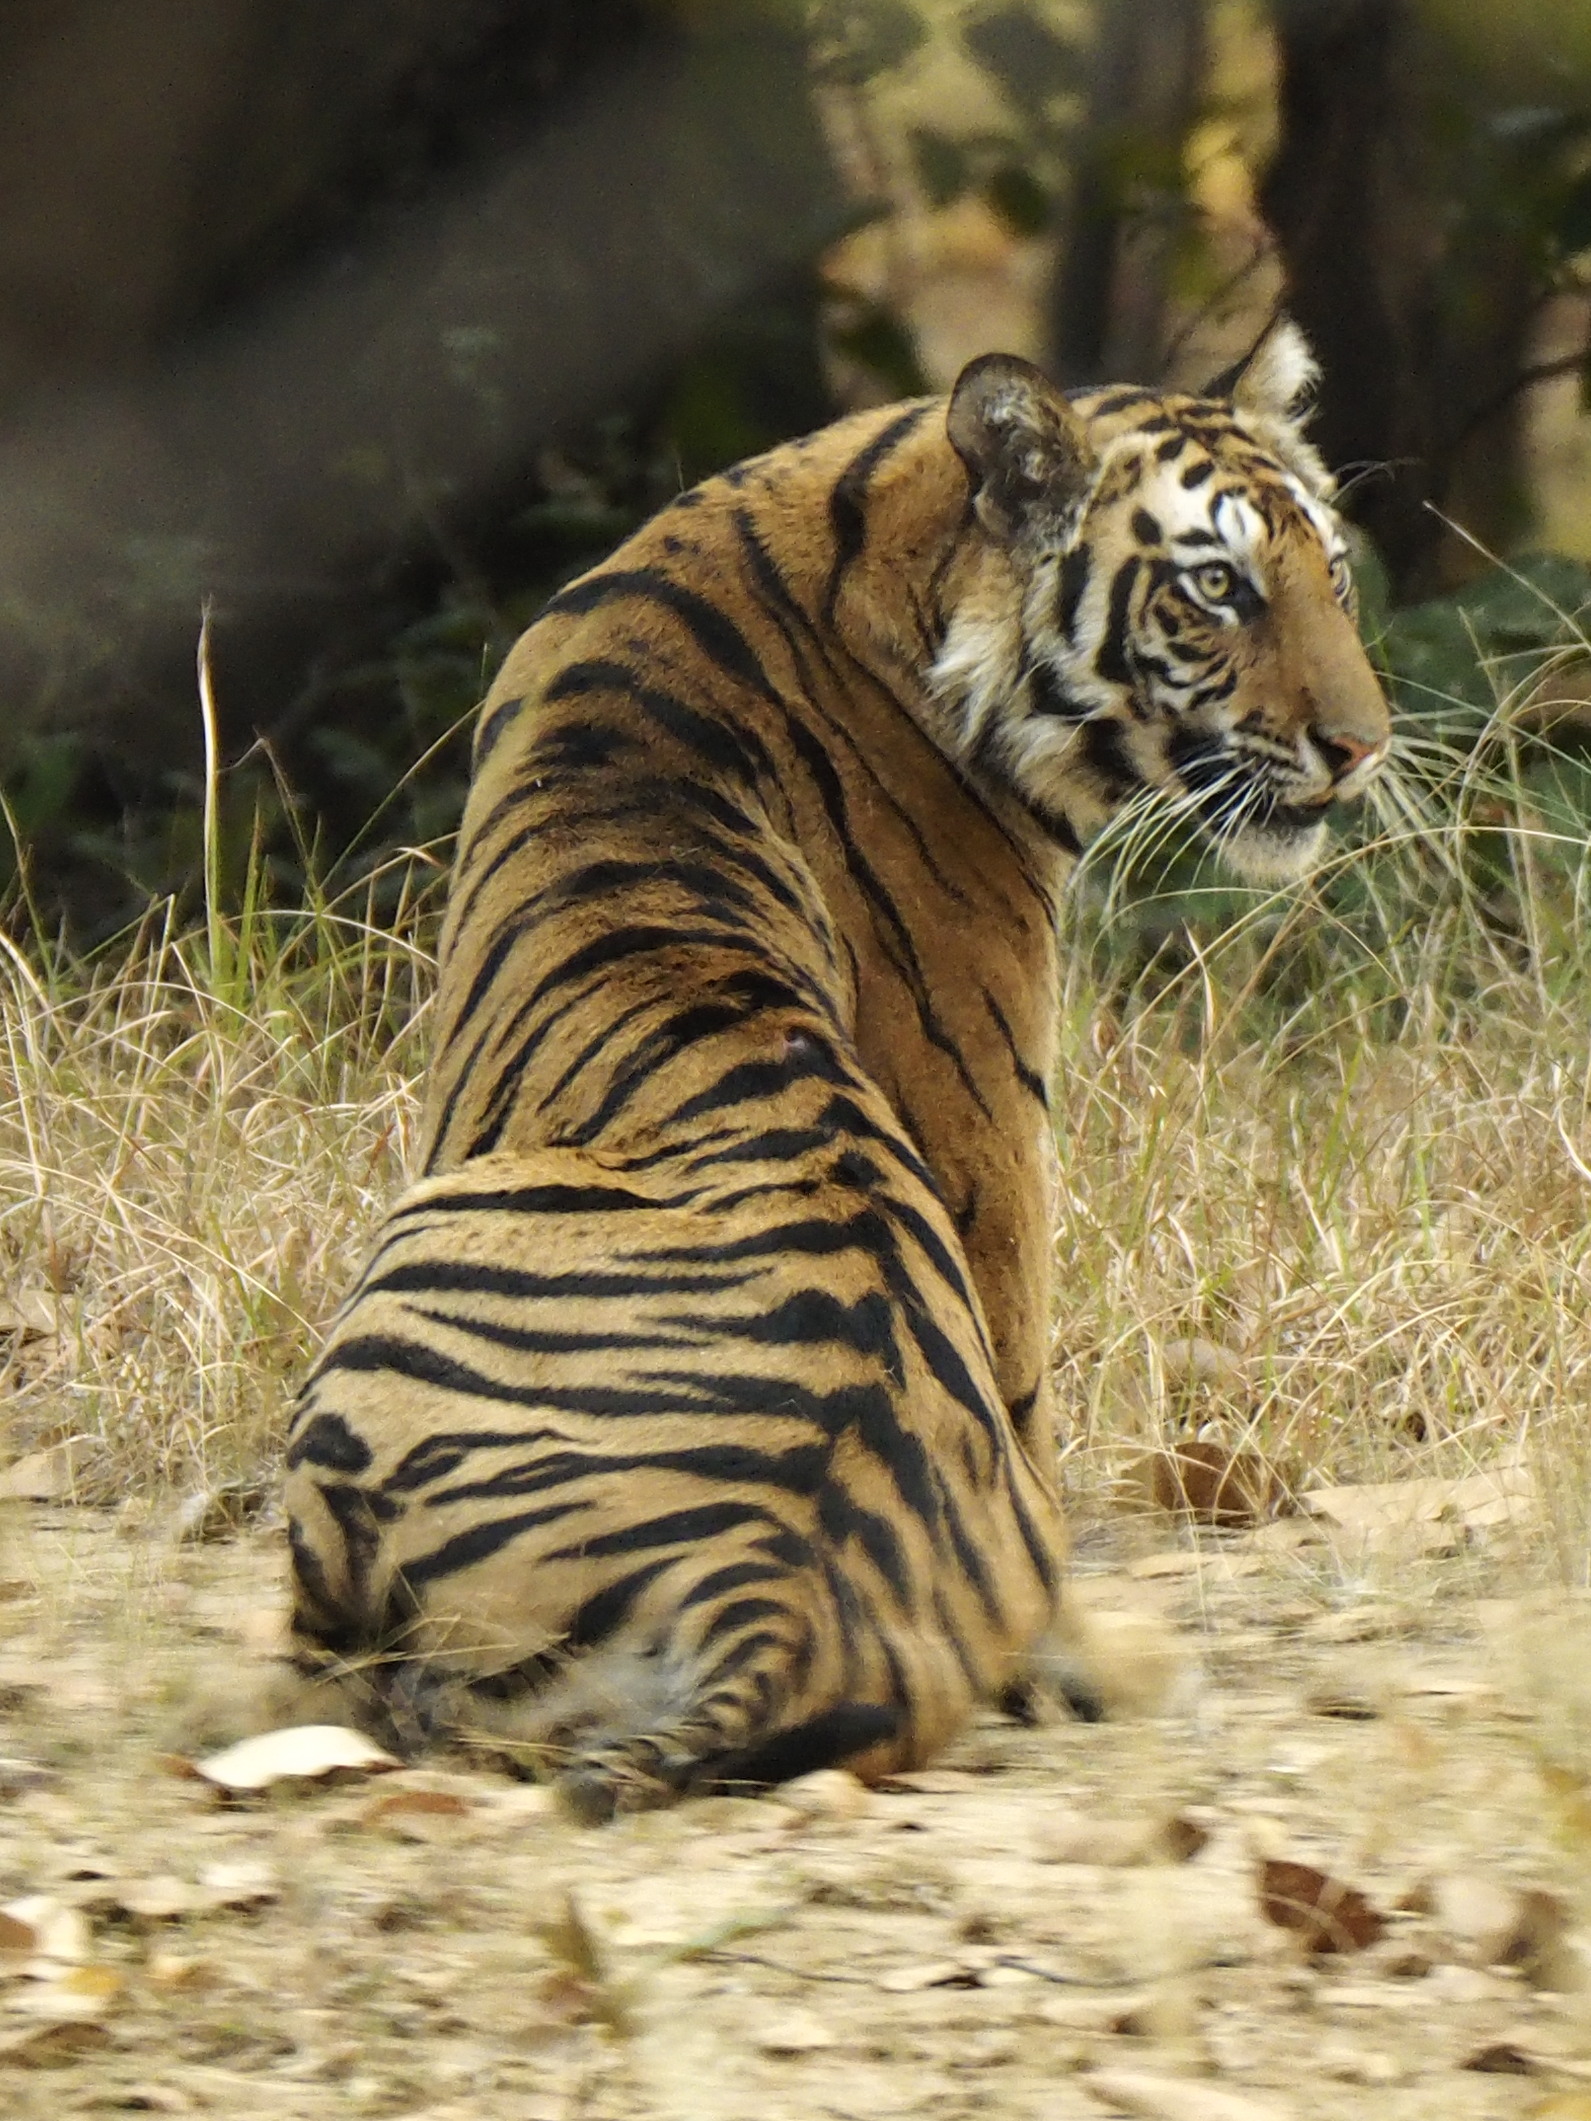 A Bengal Tiger shown sitting down